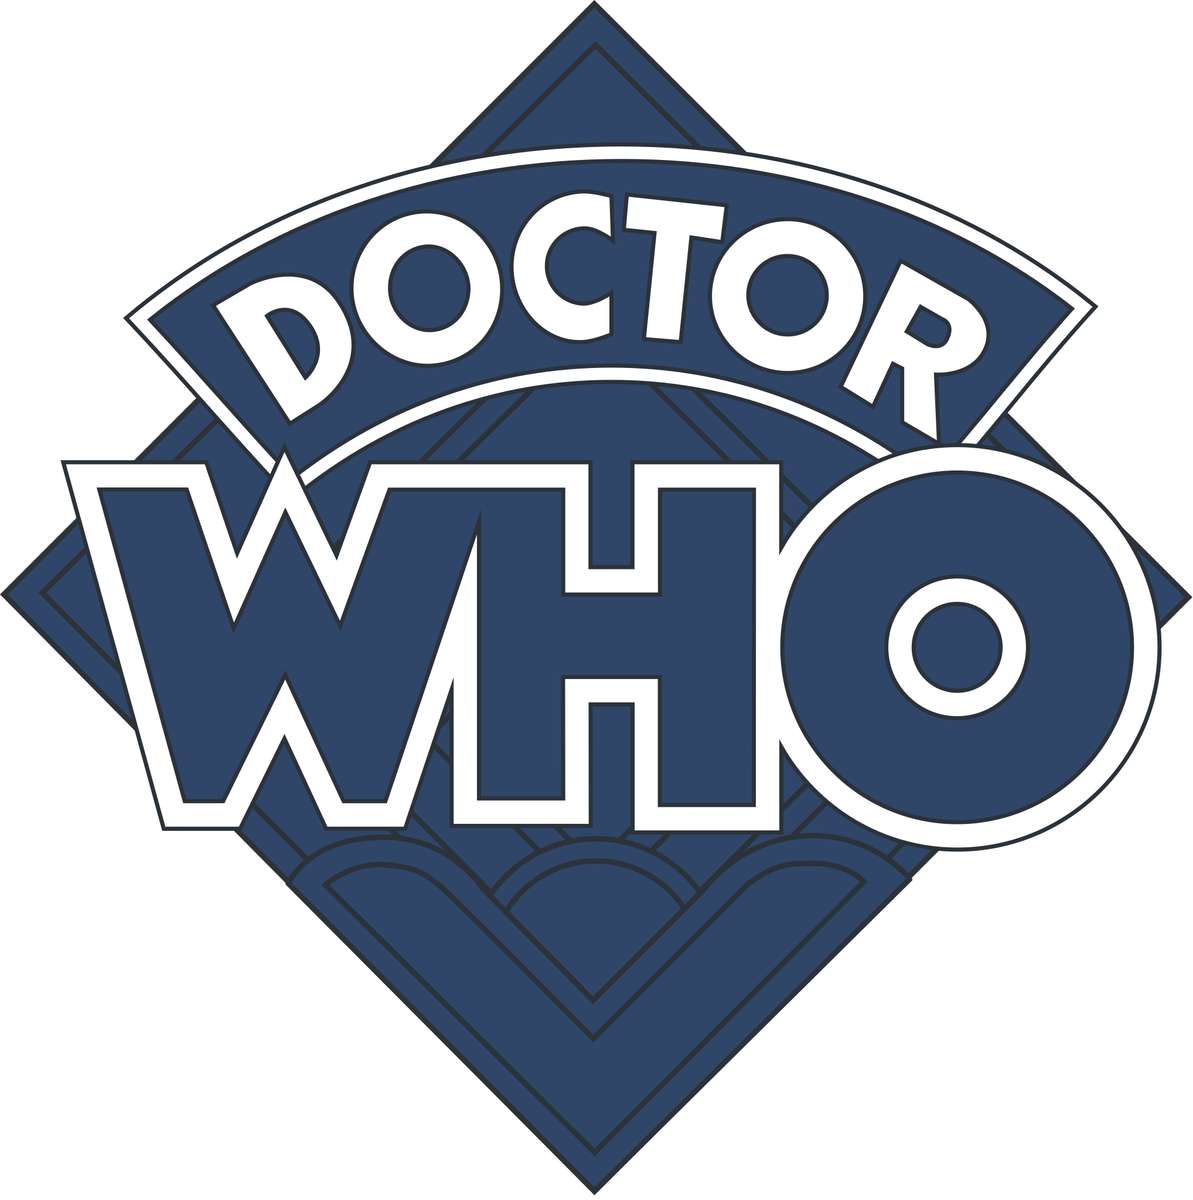 Doctor who legpuzzel online